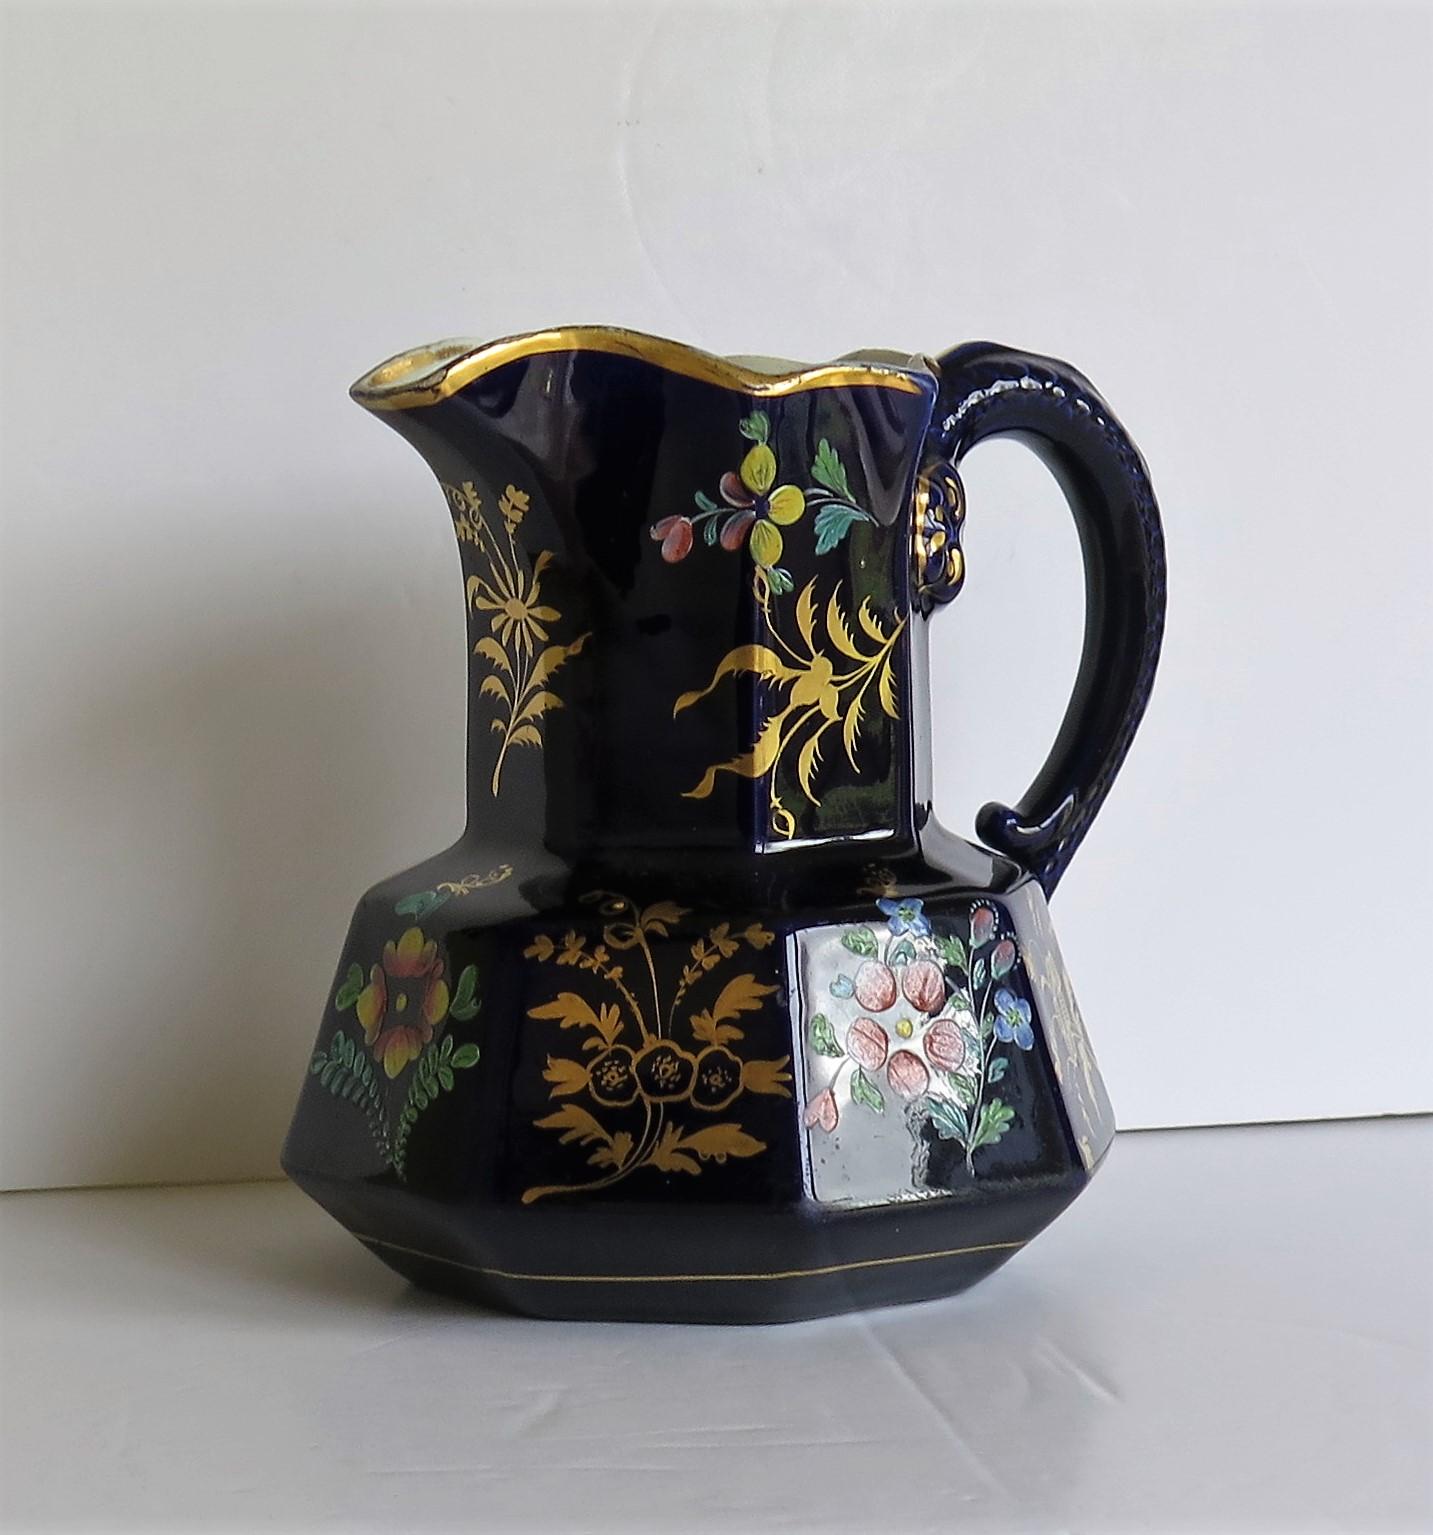 George IV Rare Early 19th Century Ironstone Jug or Pitcher, Zachariah Boyle Hand Enamelled